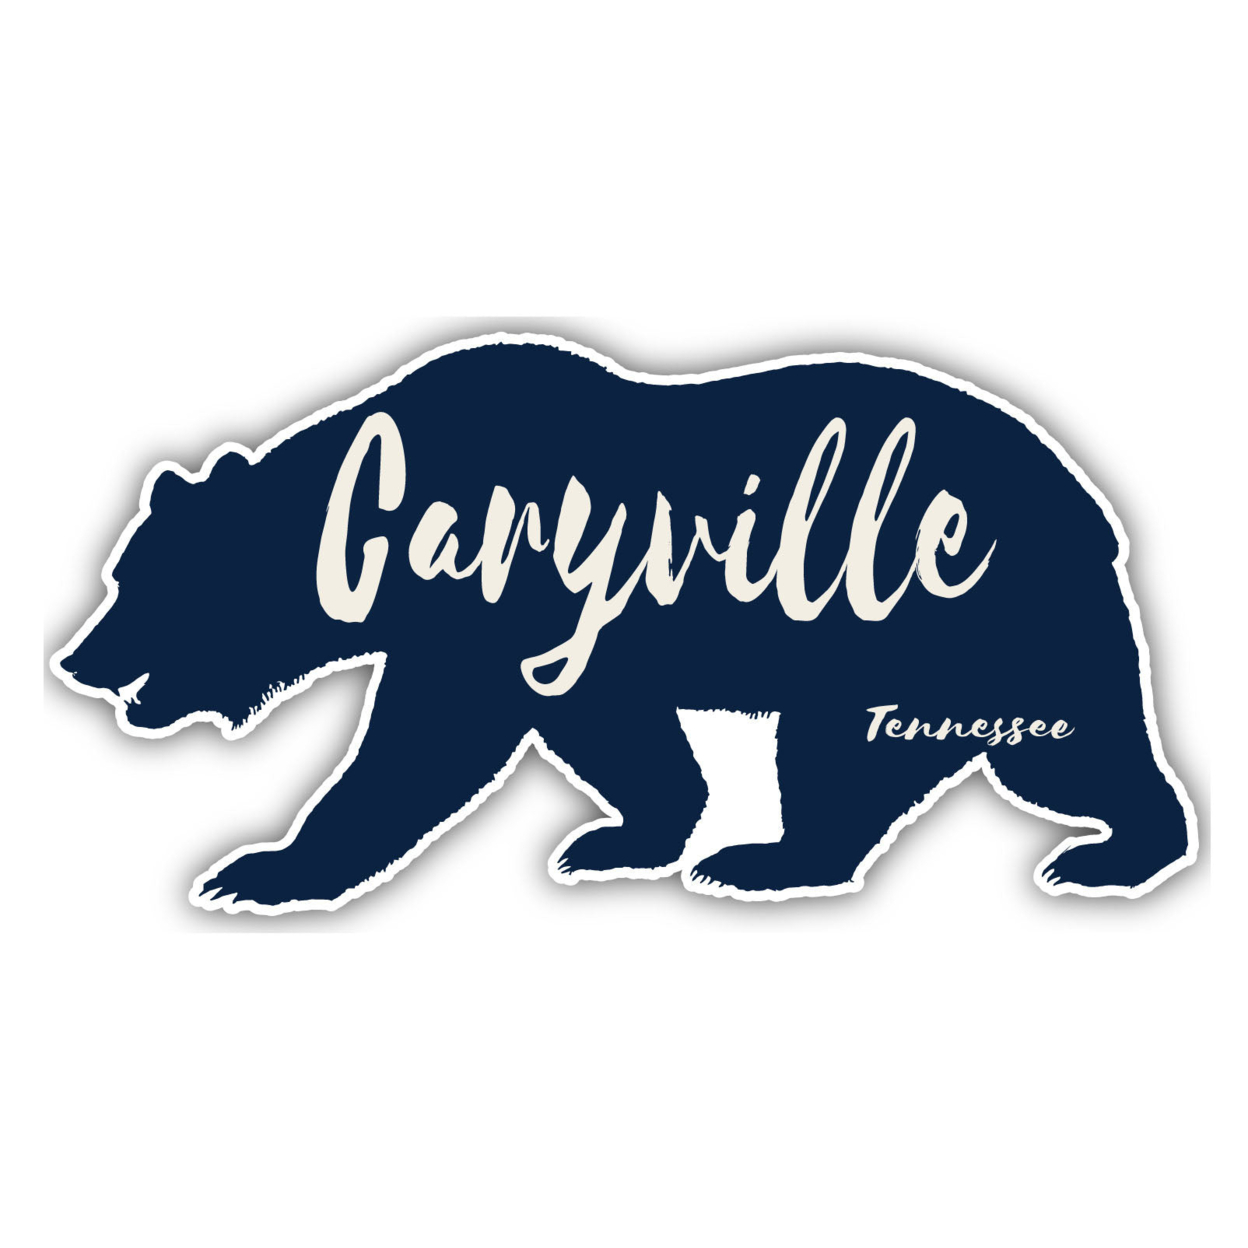 Caryville Tennessee Souvenir Decorative Stickers (Choose Theme And Size) - 4-Pack, 8-Inch, Tent